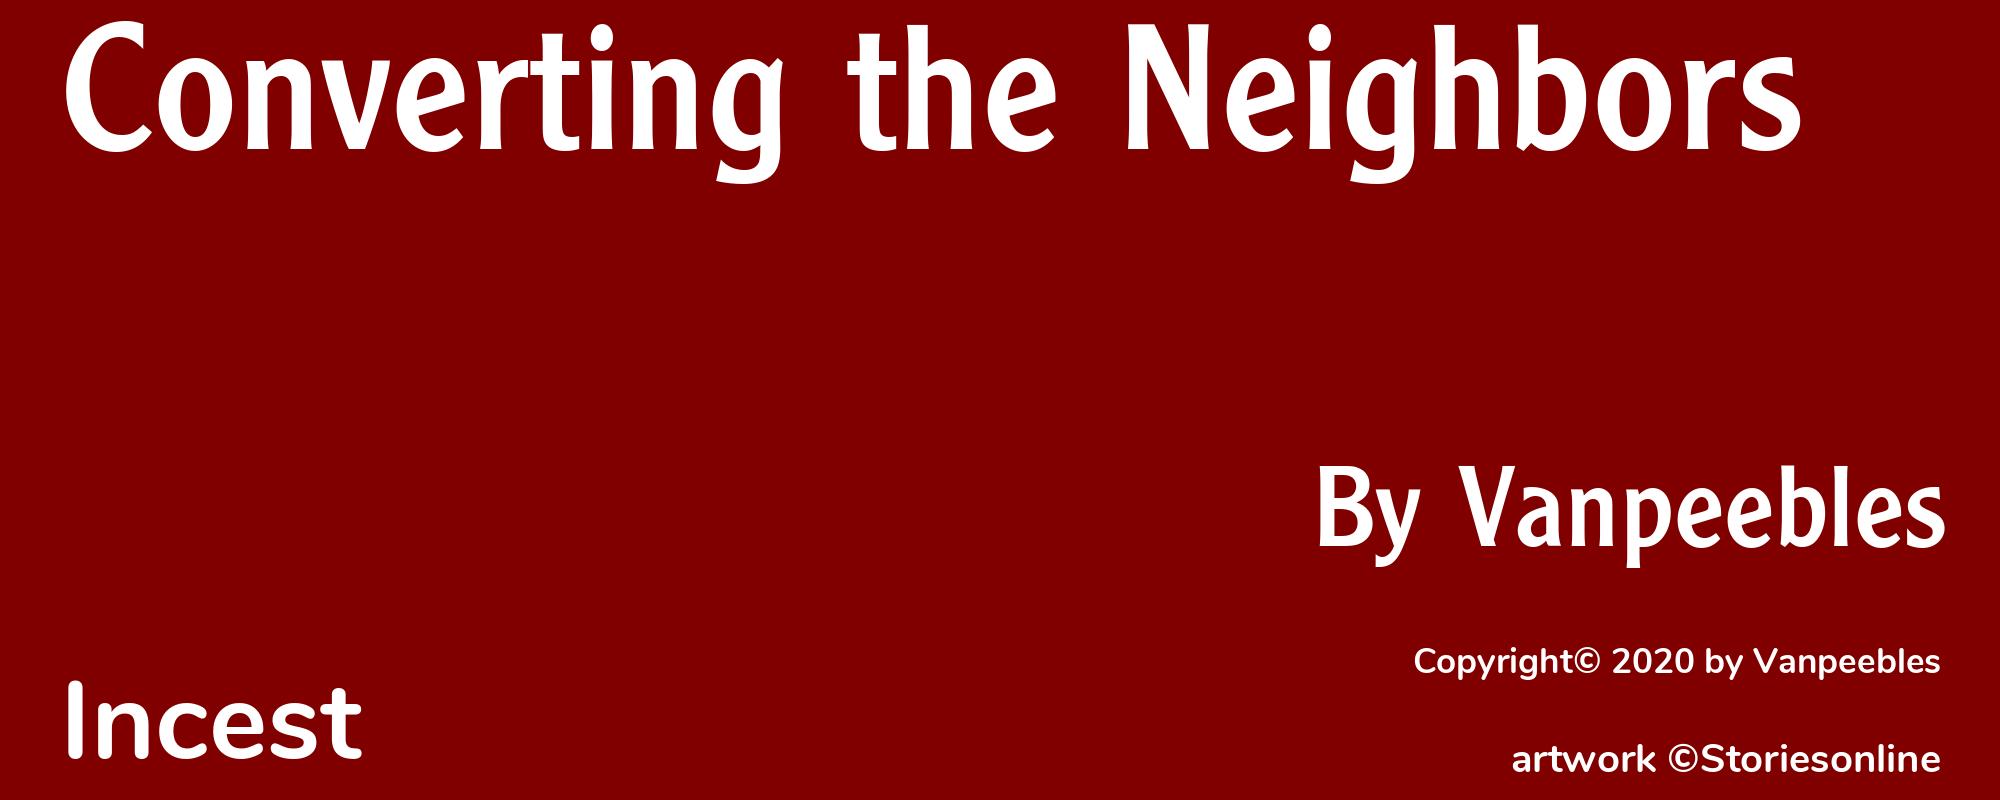 Converting the Neighbors - Cover